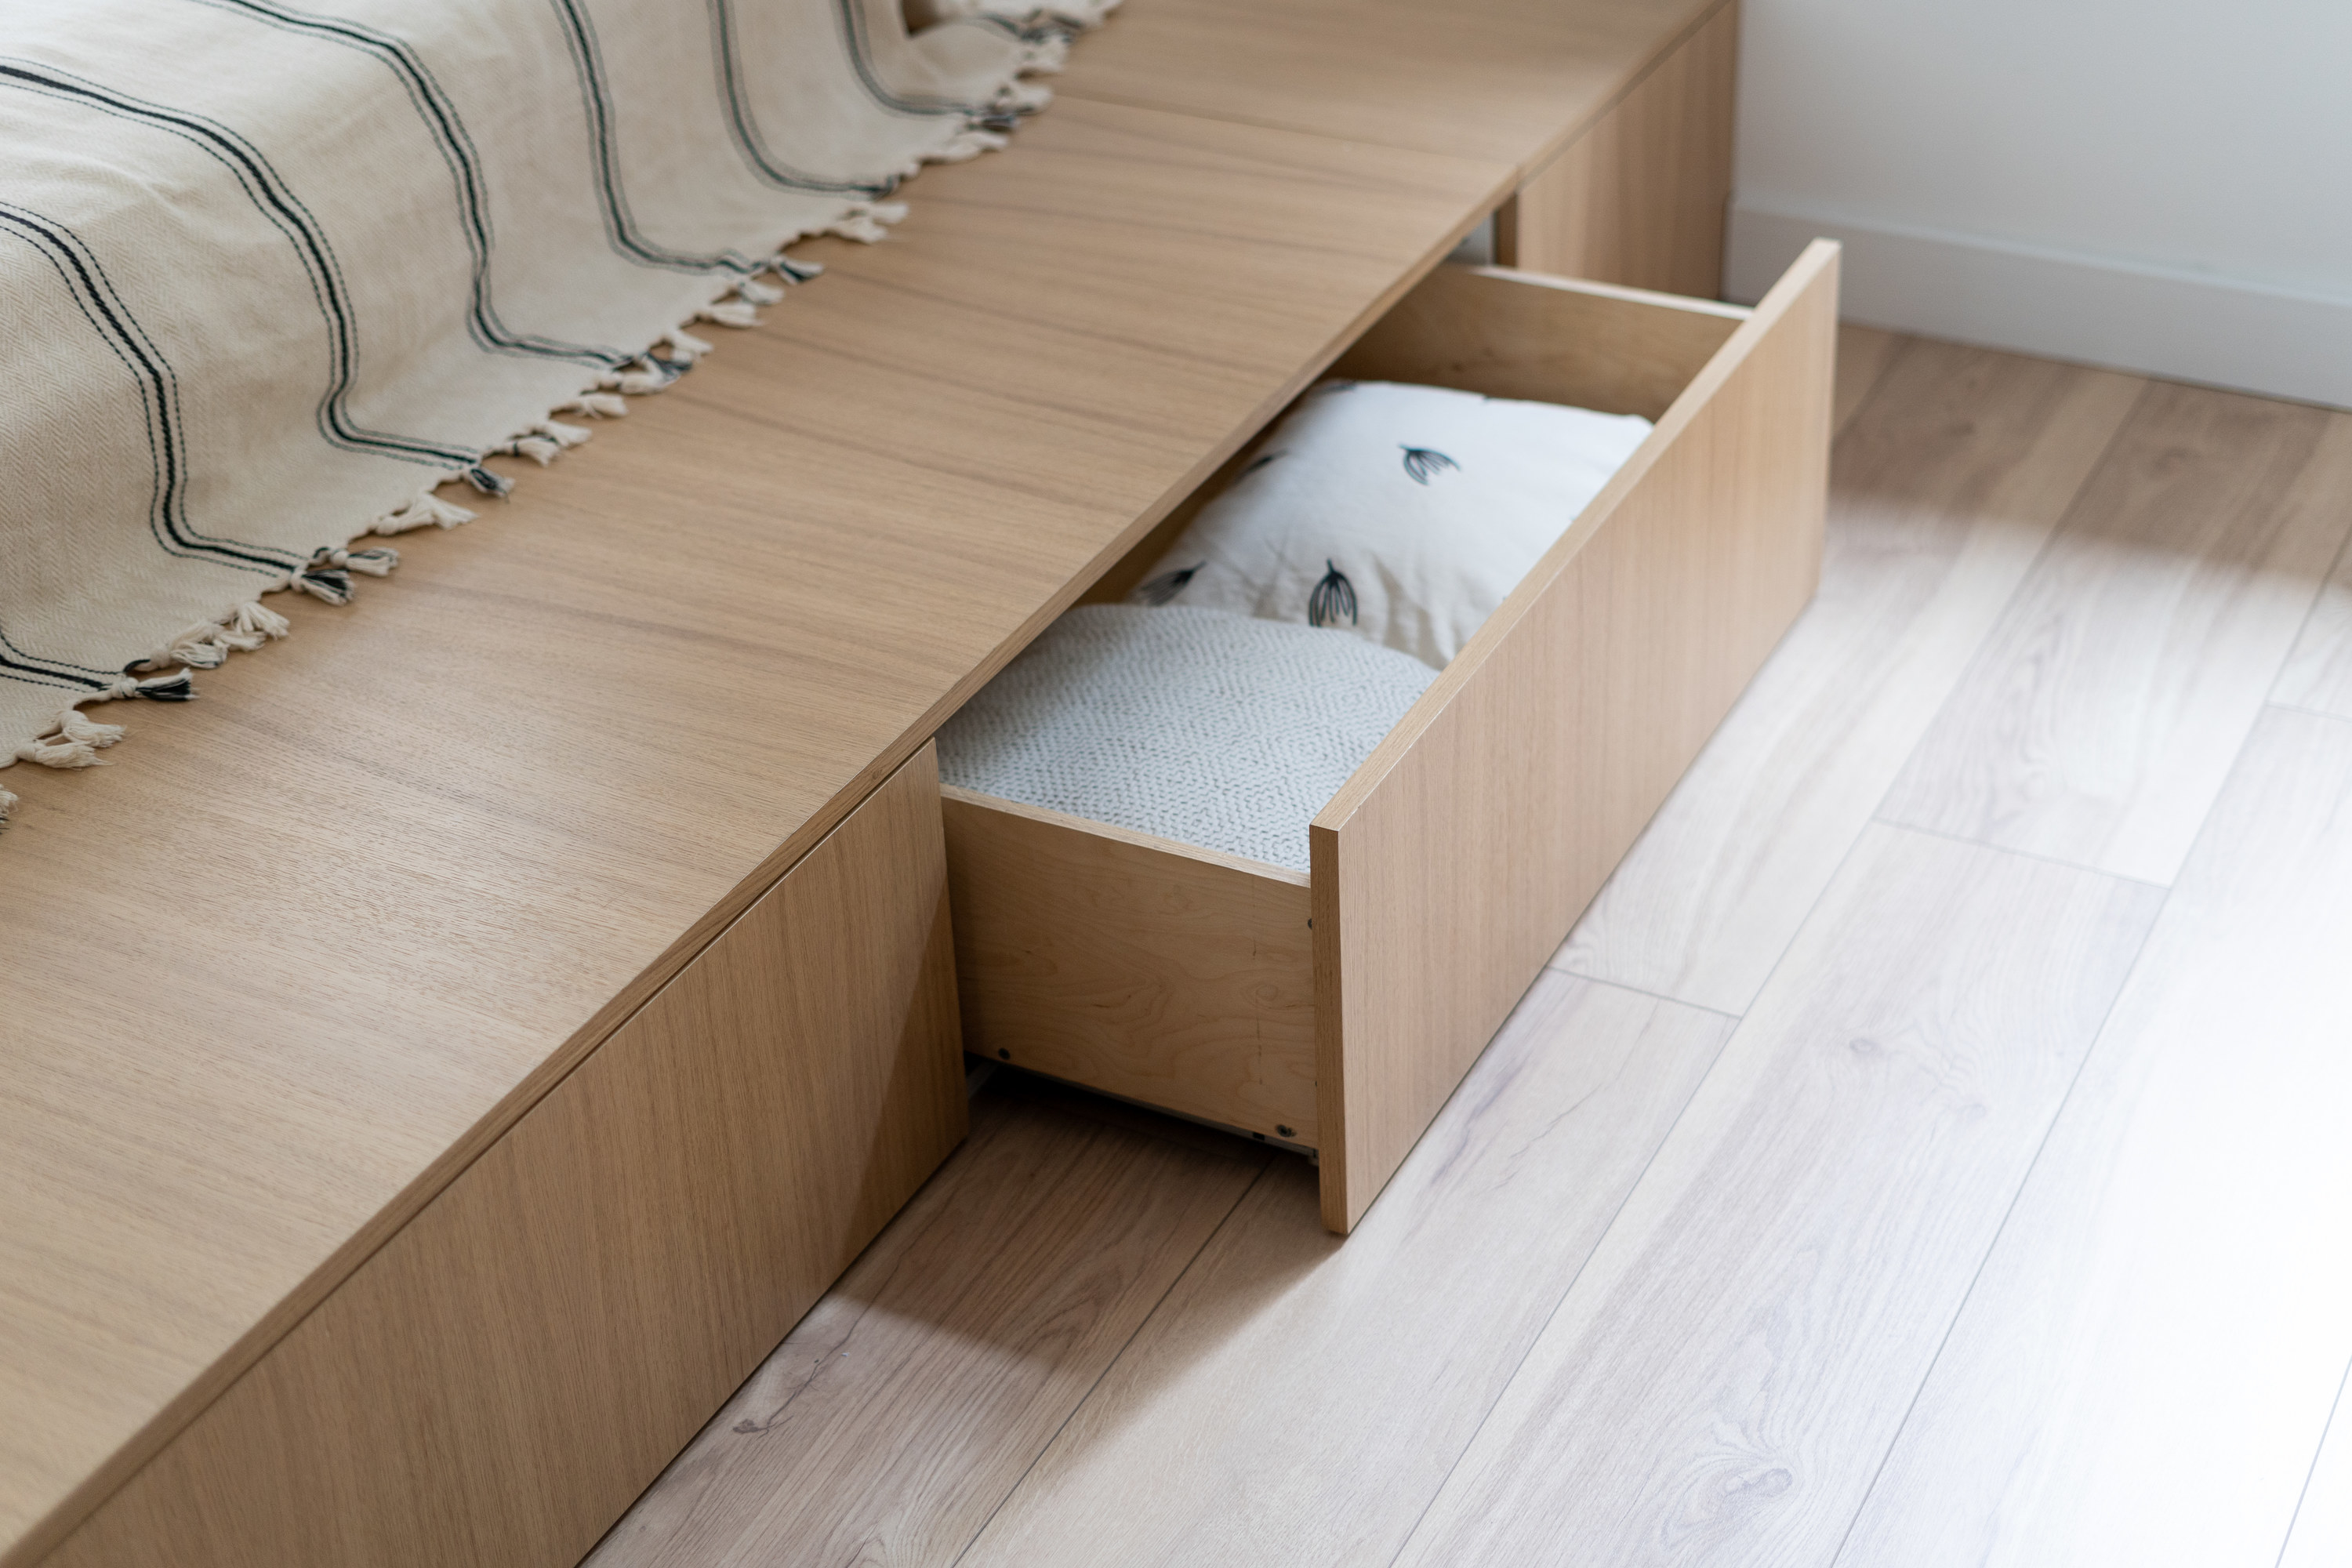 a bed frame with hidden storage drawers